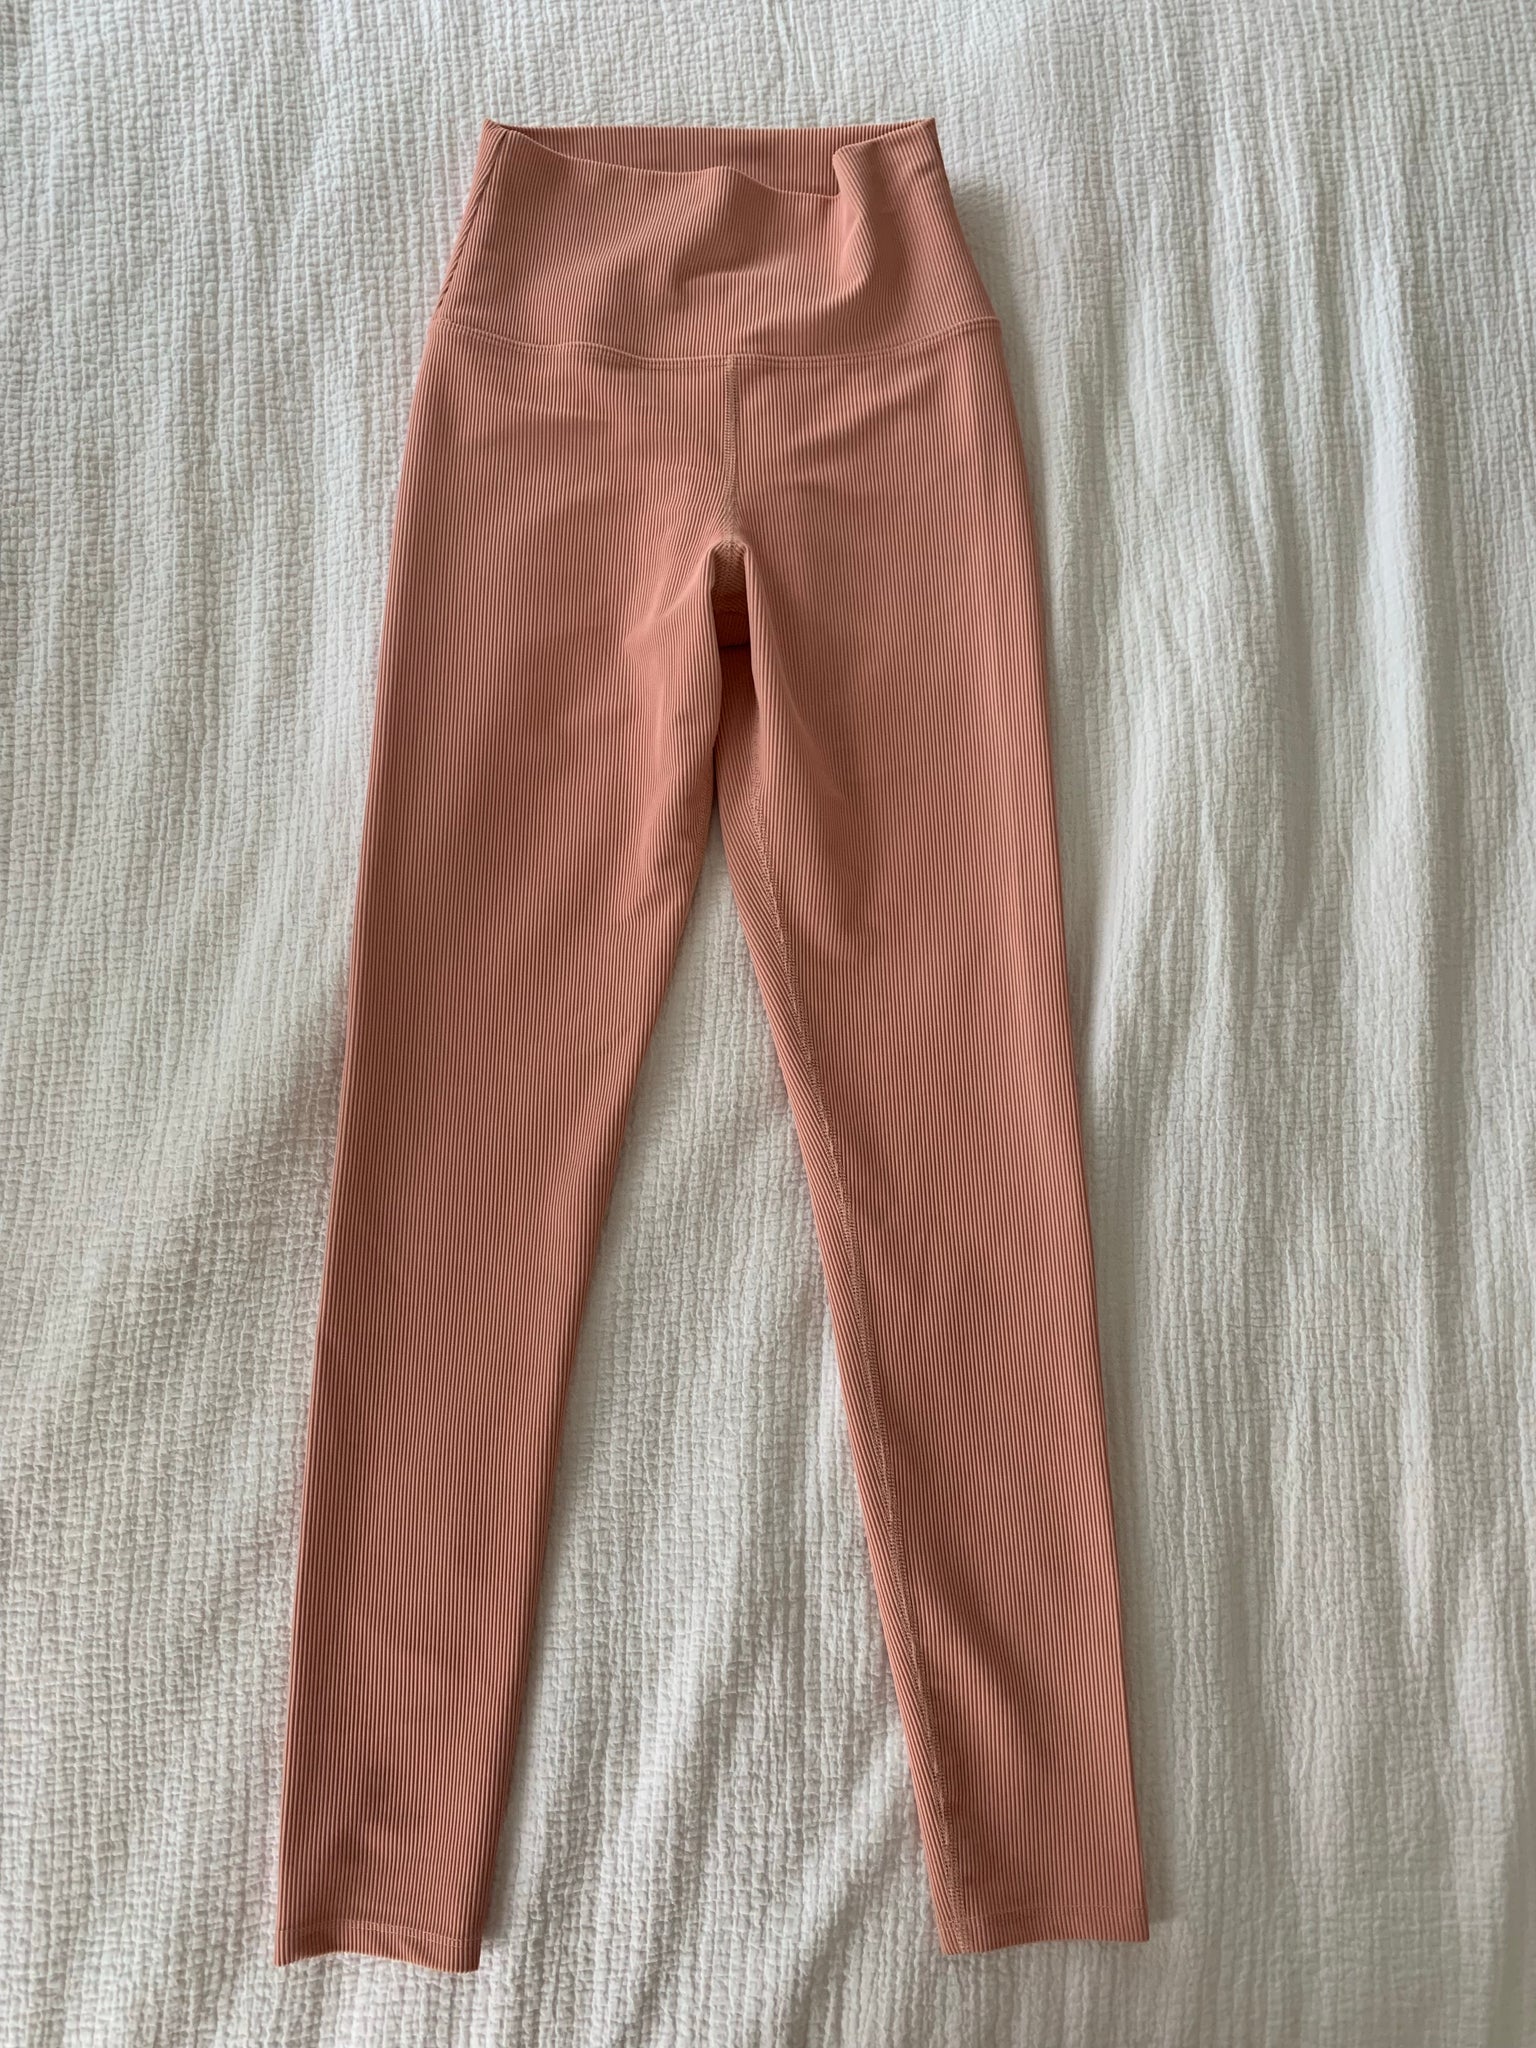 Beach Riot Ribbed Leggings sz small – Fourth Ave Thrift